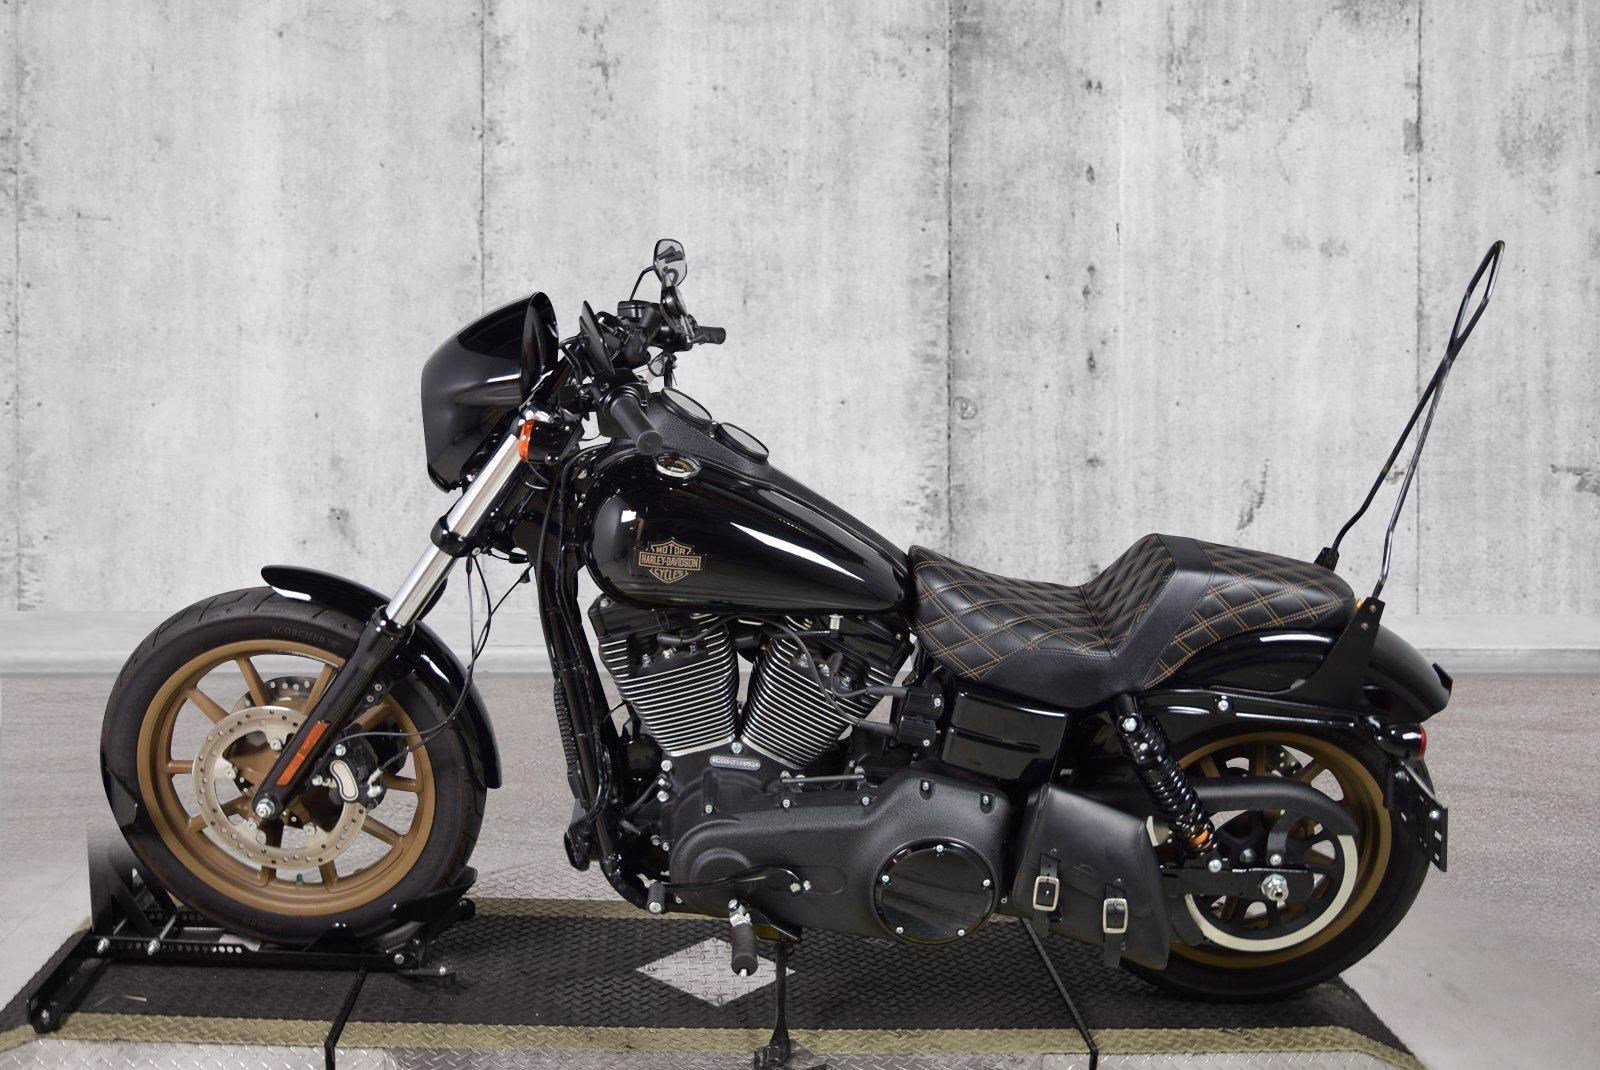 Pre-Owned 2017 Harley-Davidson Dyna Low Rider S FXDLS Dyna in Riverside ...